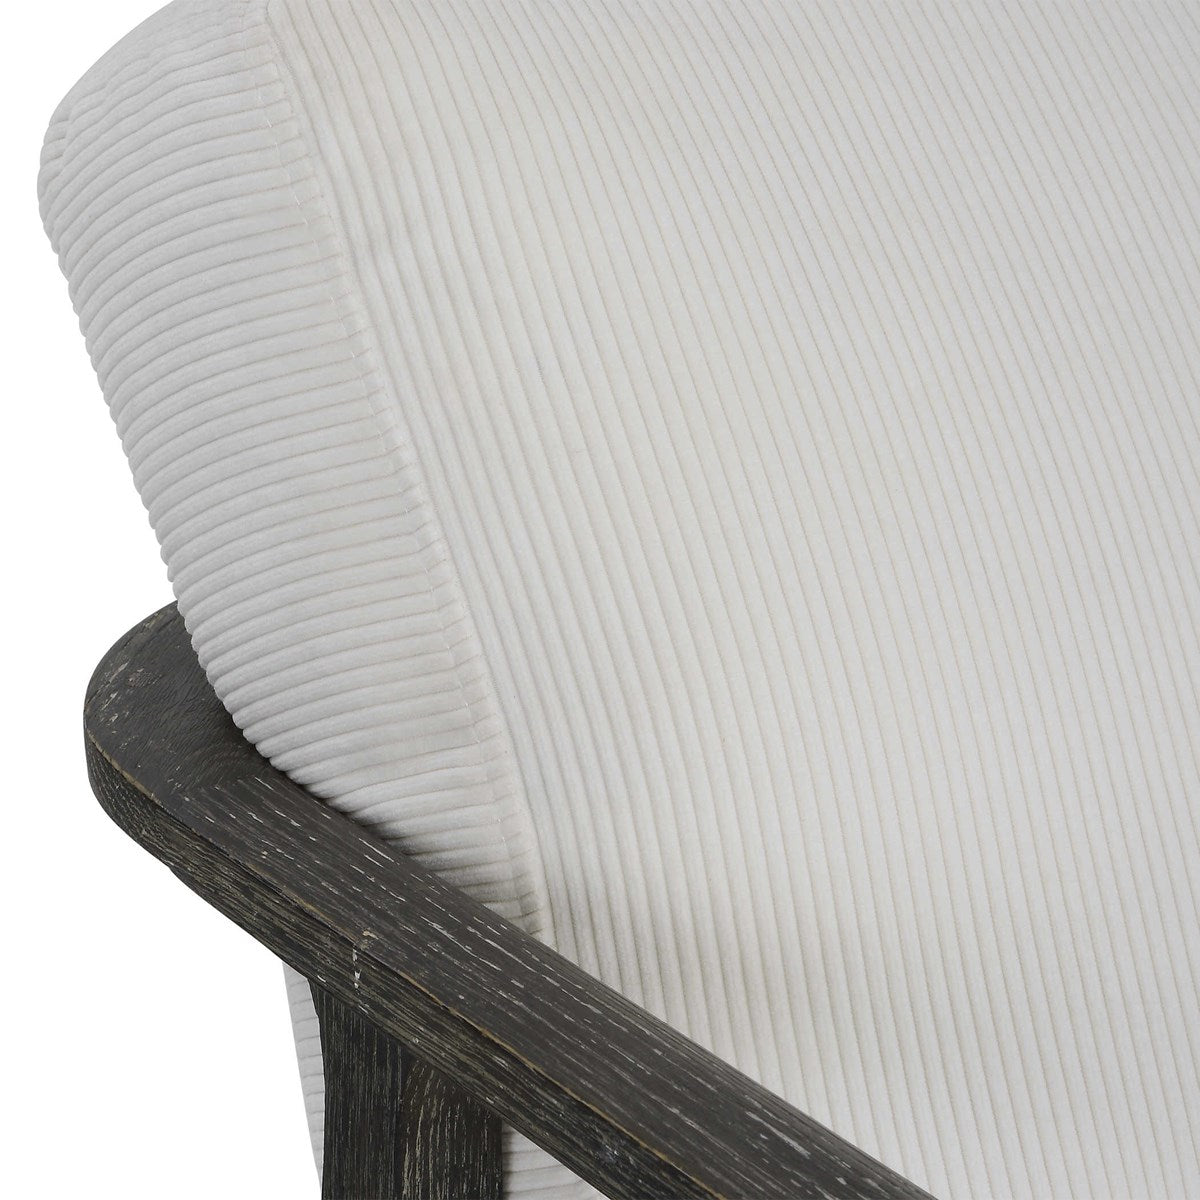 Palerma White Accent Chair